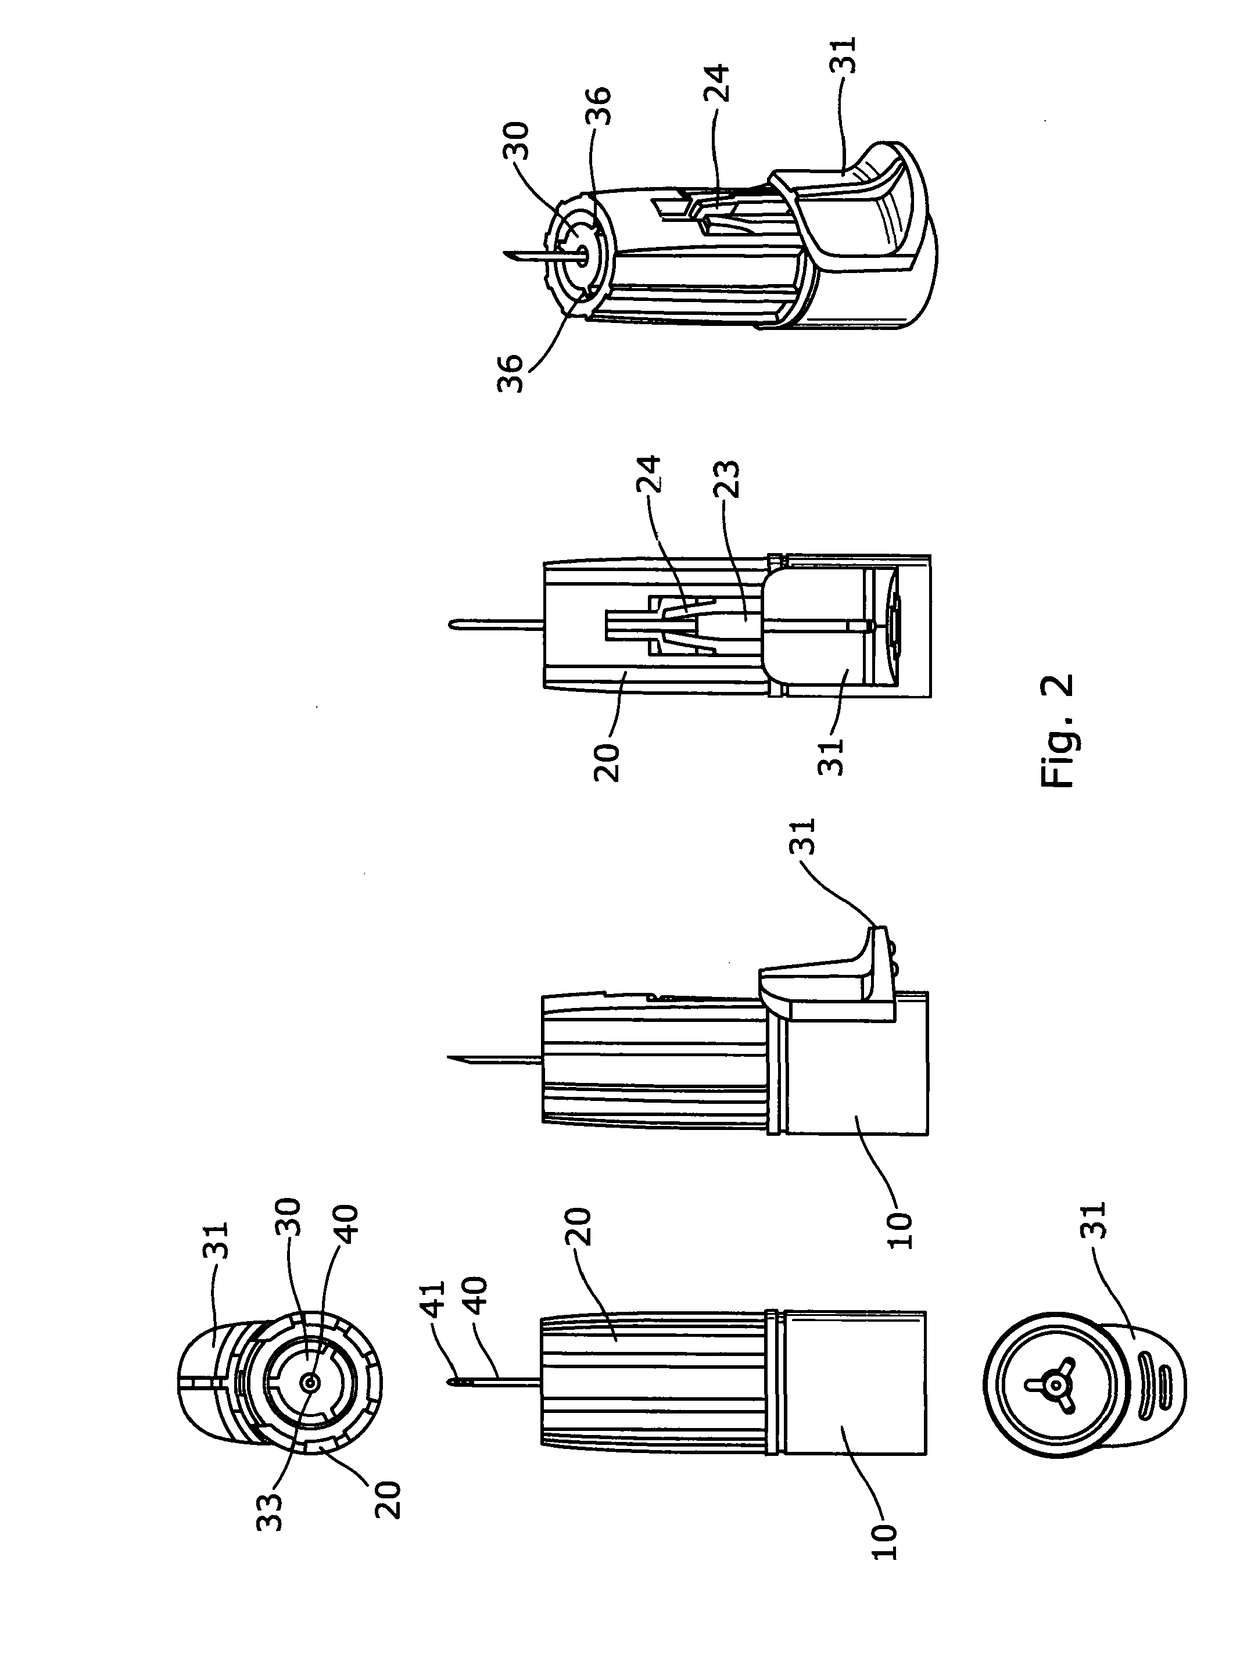 Needle assembly with needle shroud and movable needle support